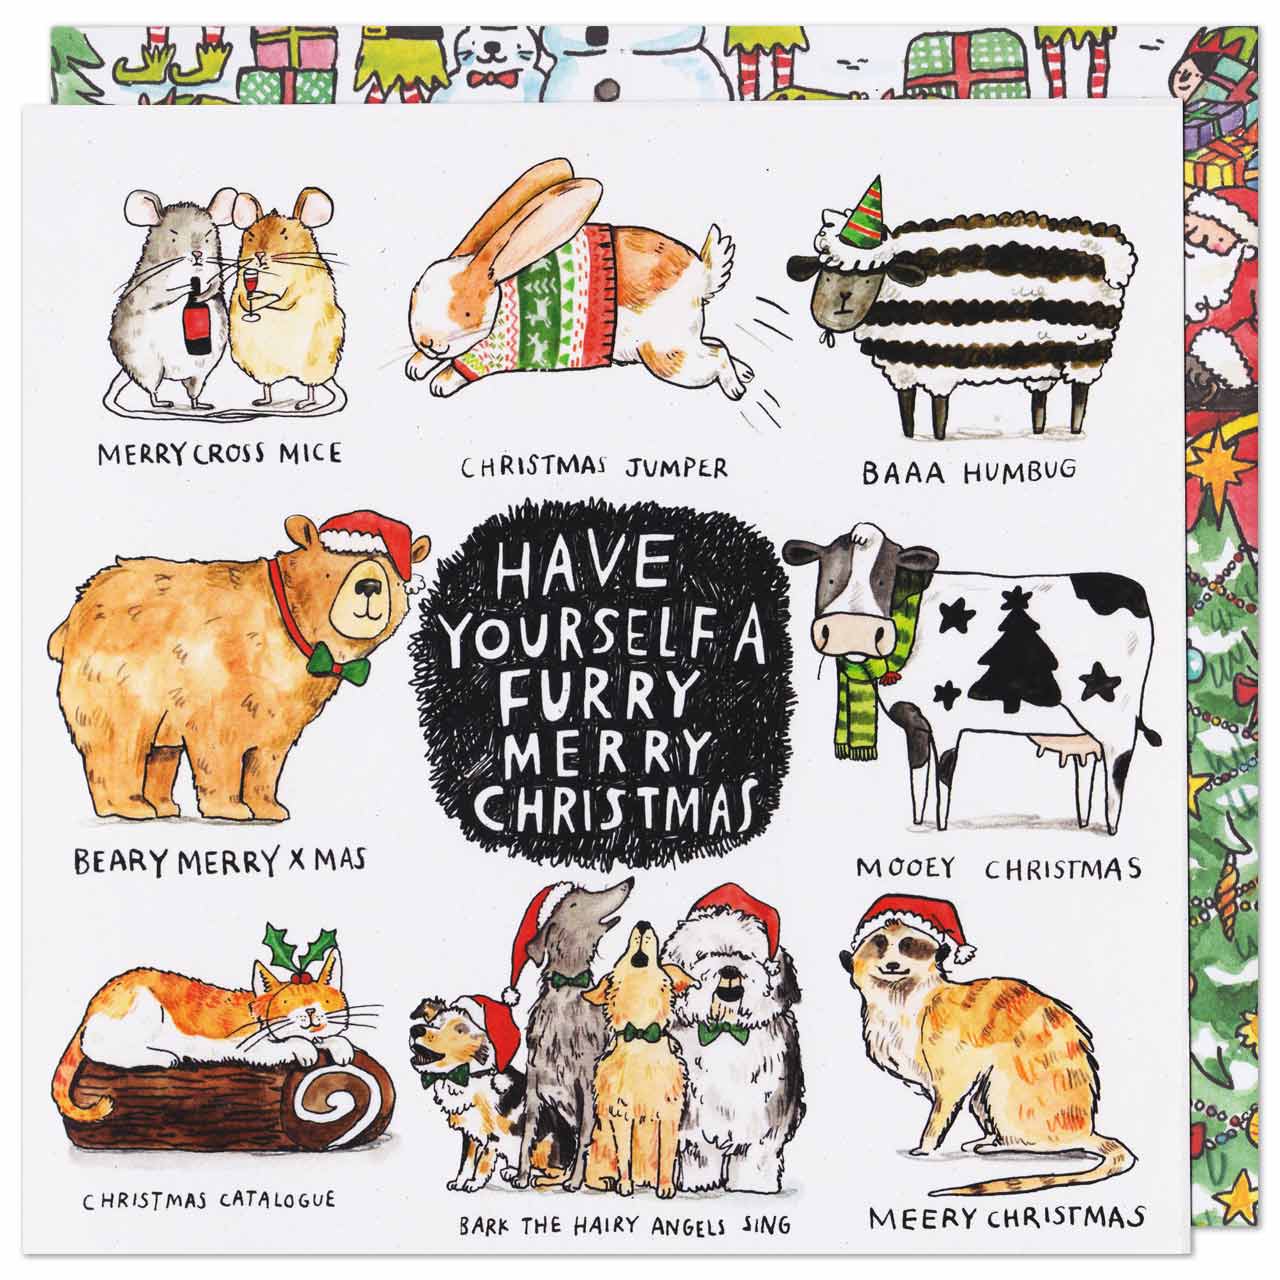 Have Yourself a Furry Merry Christmas Puns Card